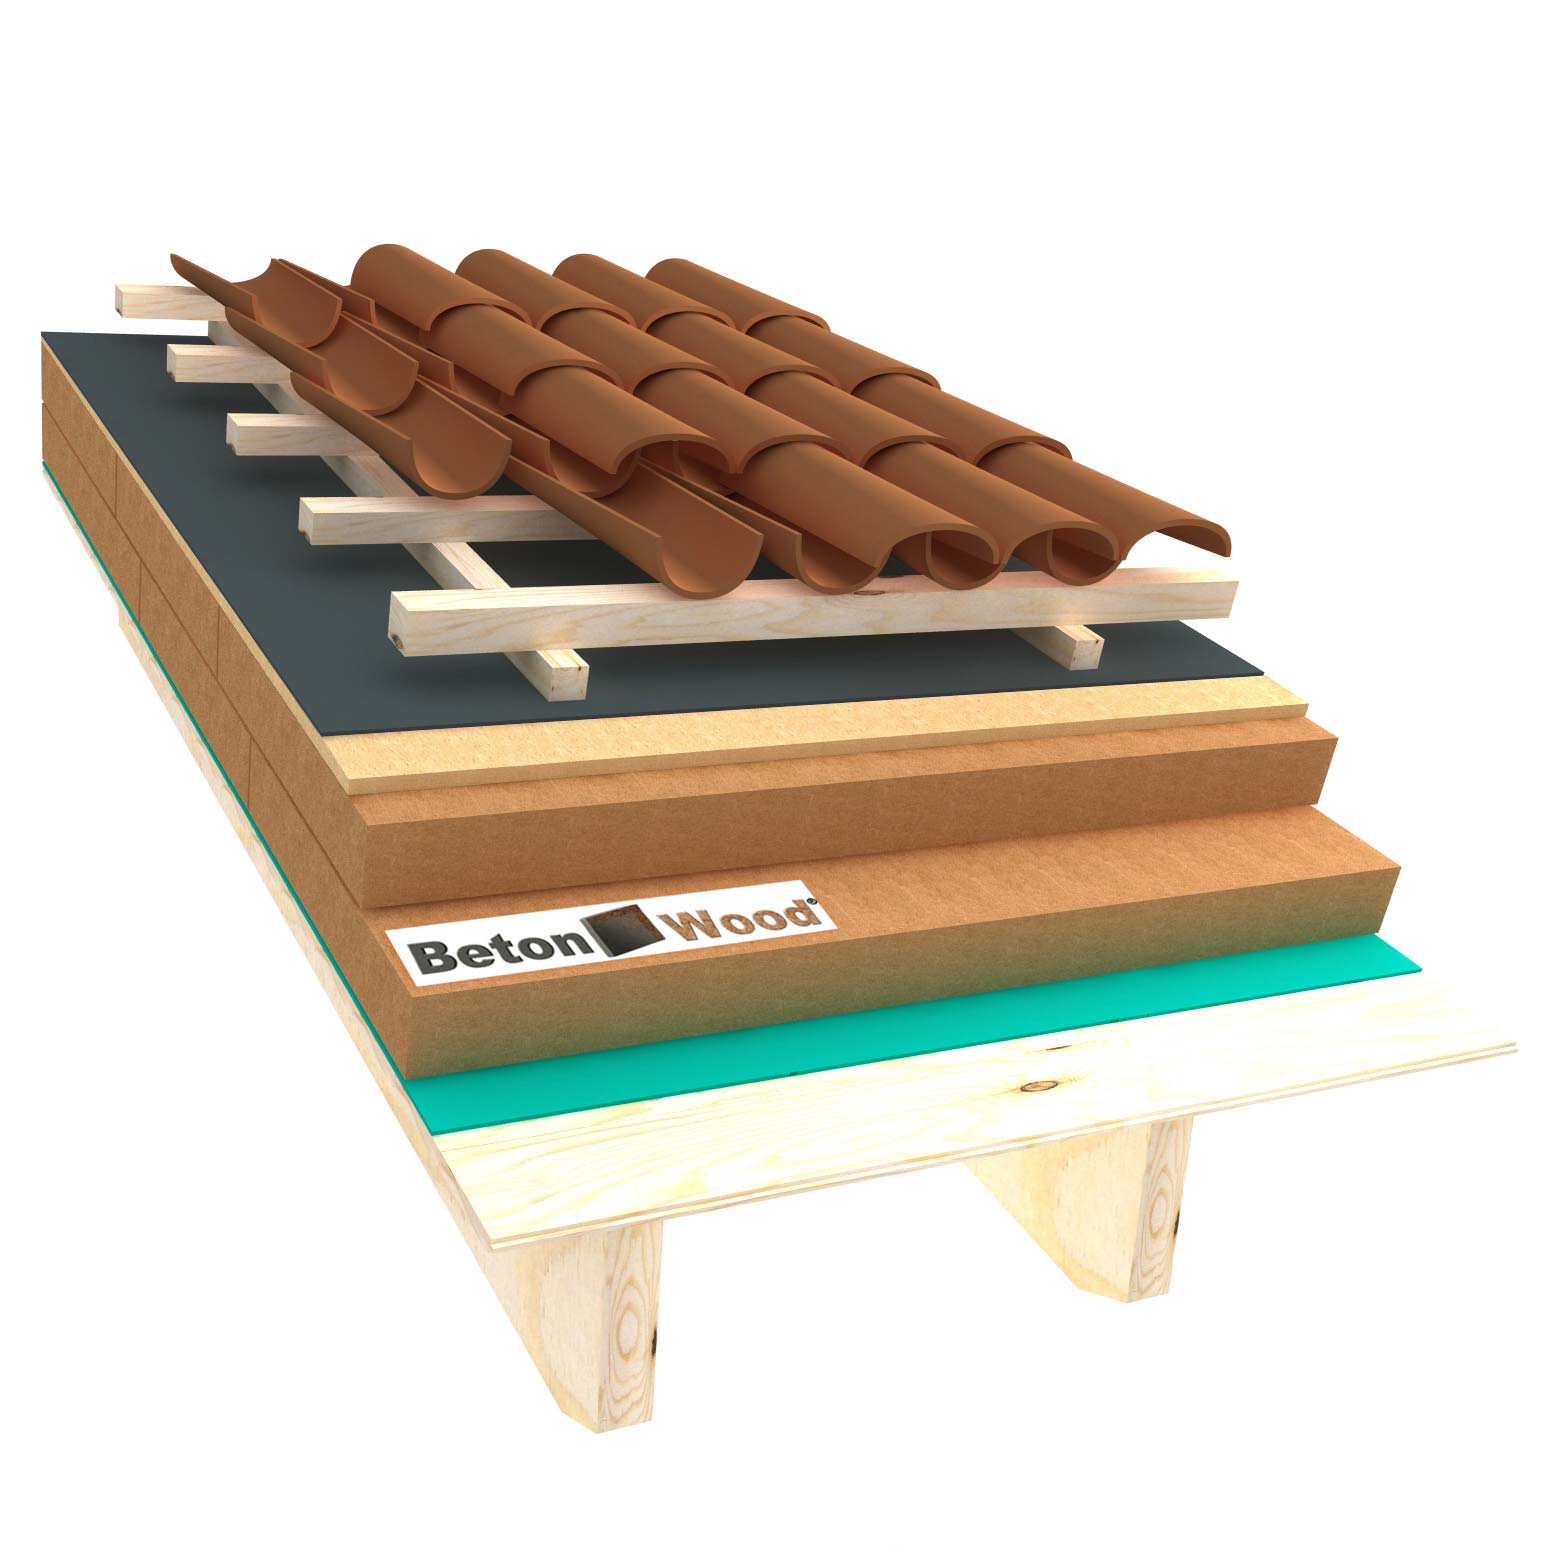 Ventilated roof with wood fiber Isorel and Therm on matchboarding